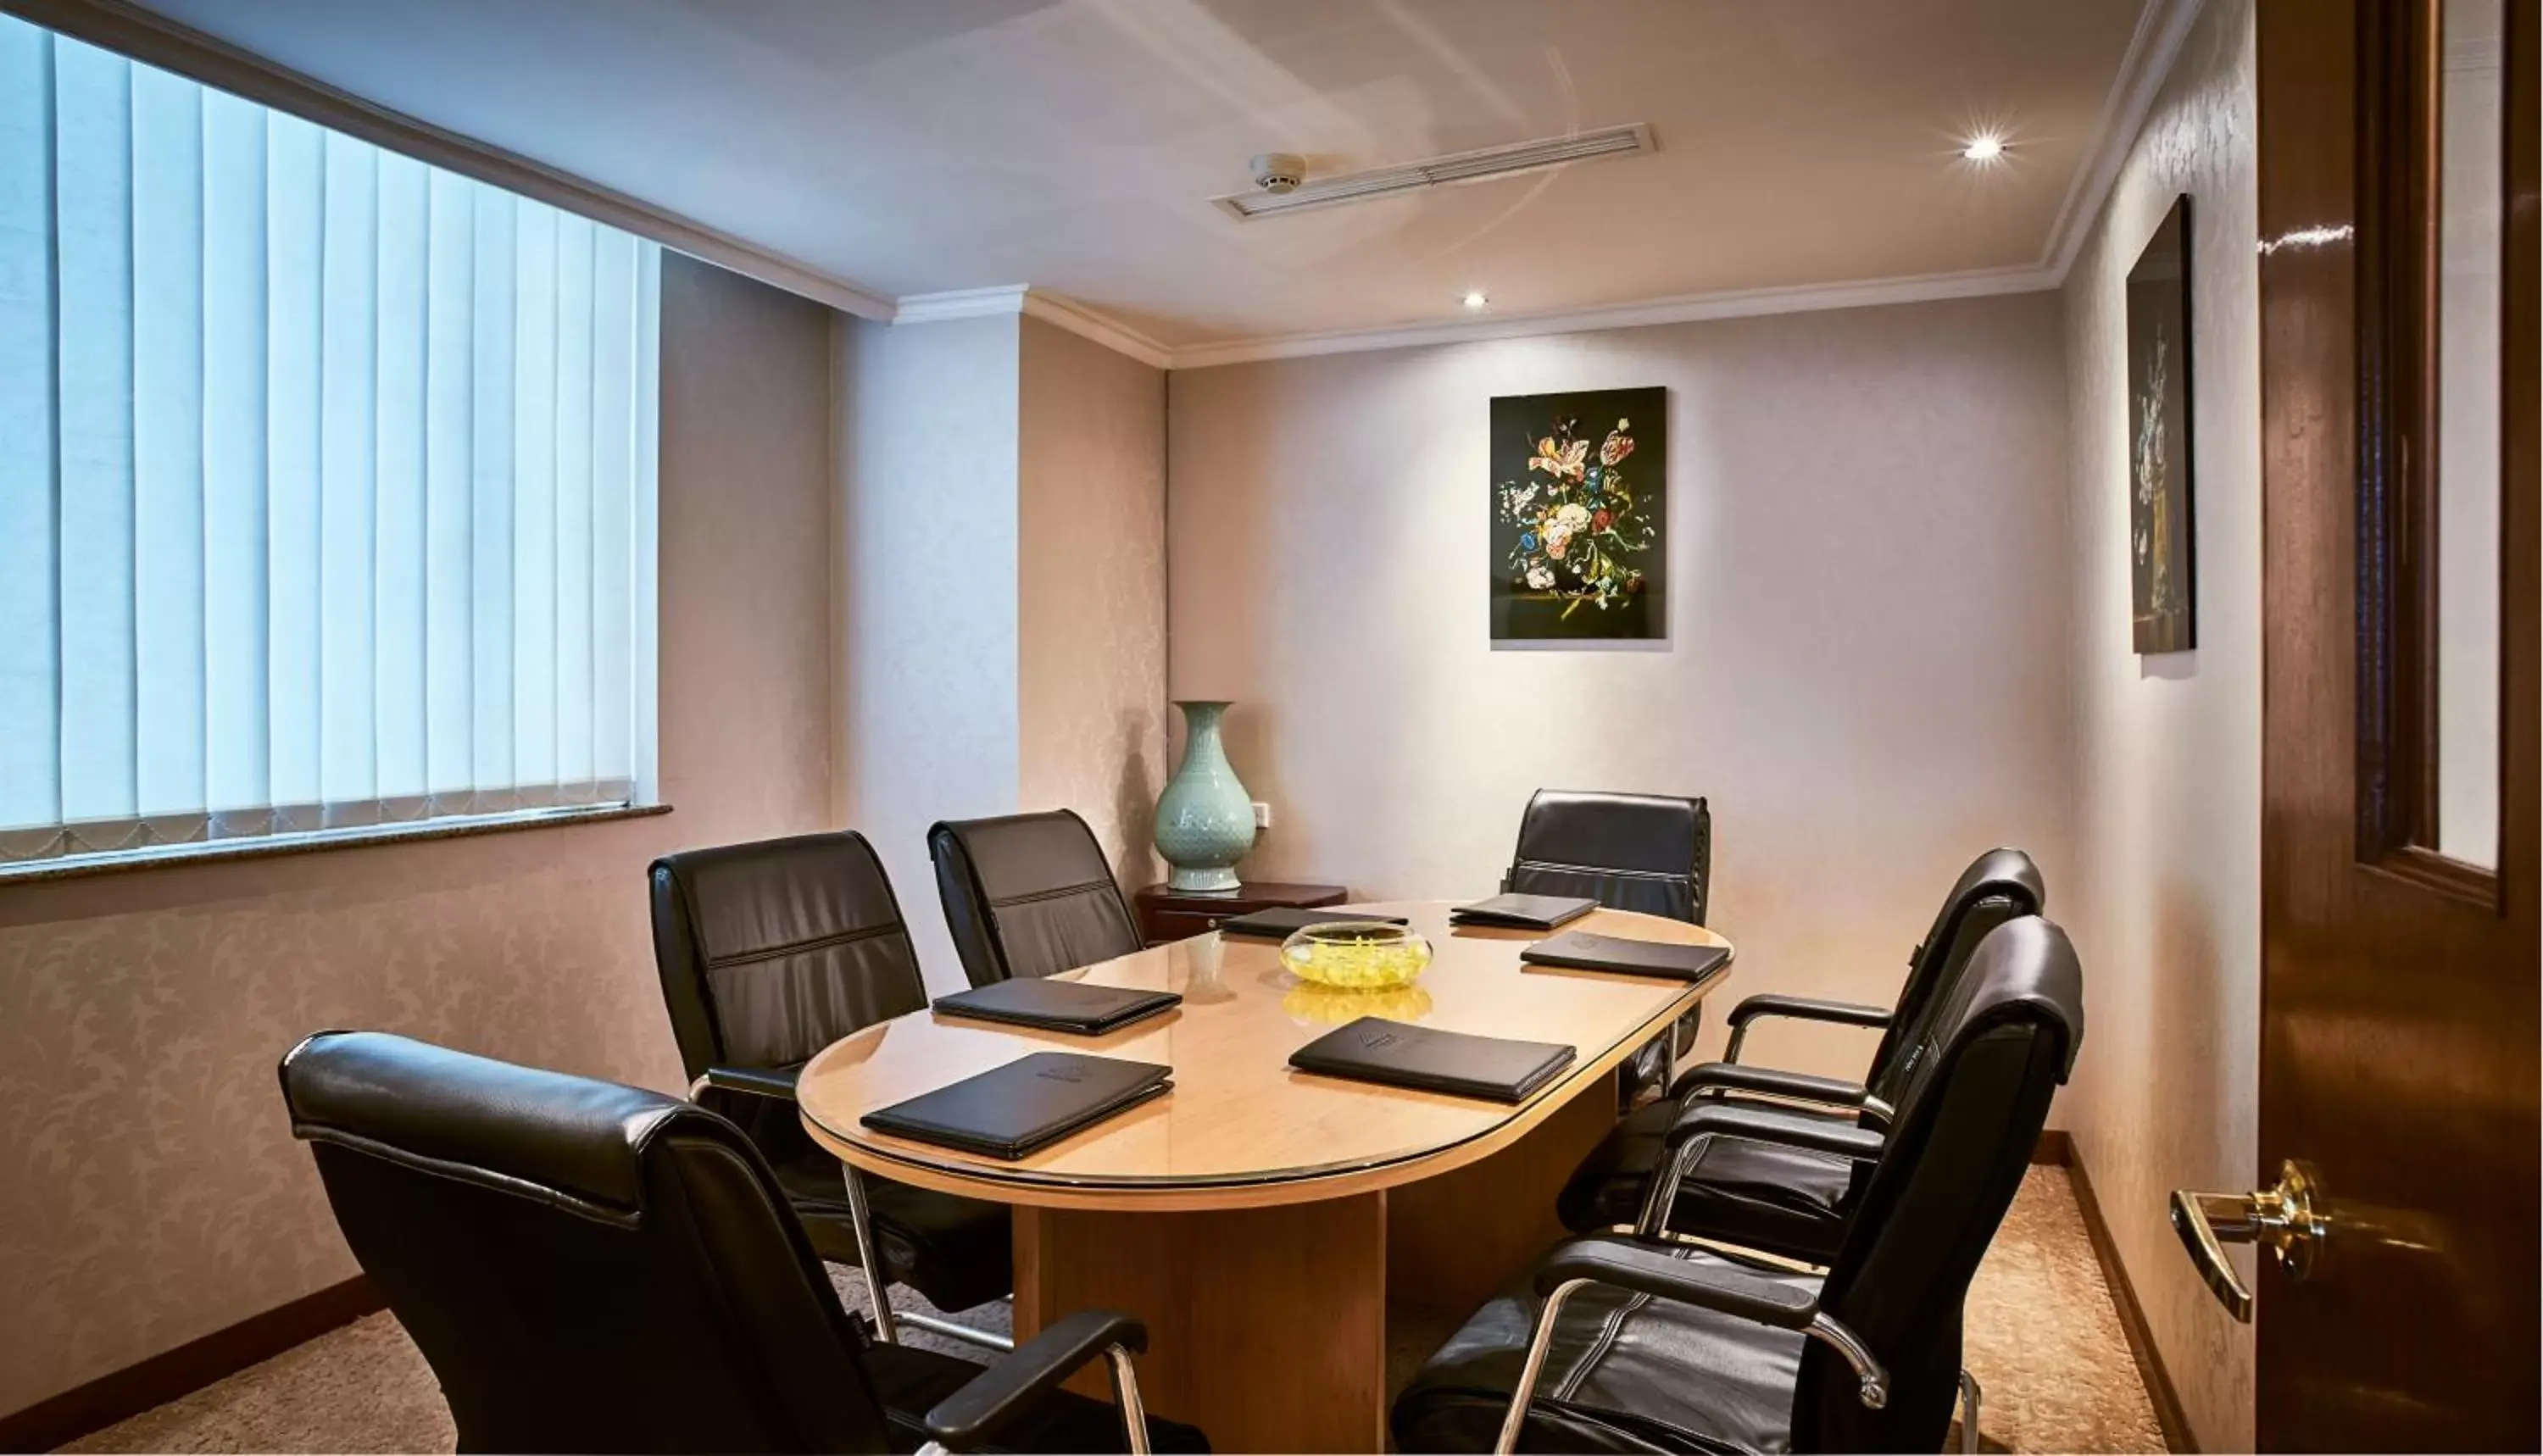 Meeting/conference room in Windsor Plaza Hotel